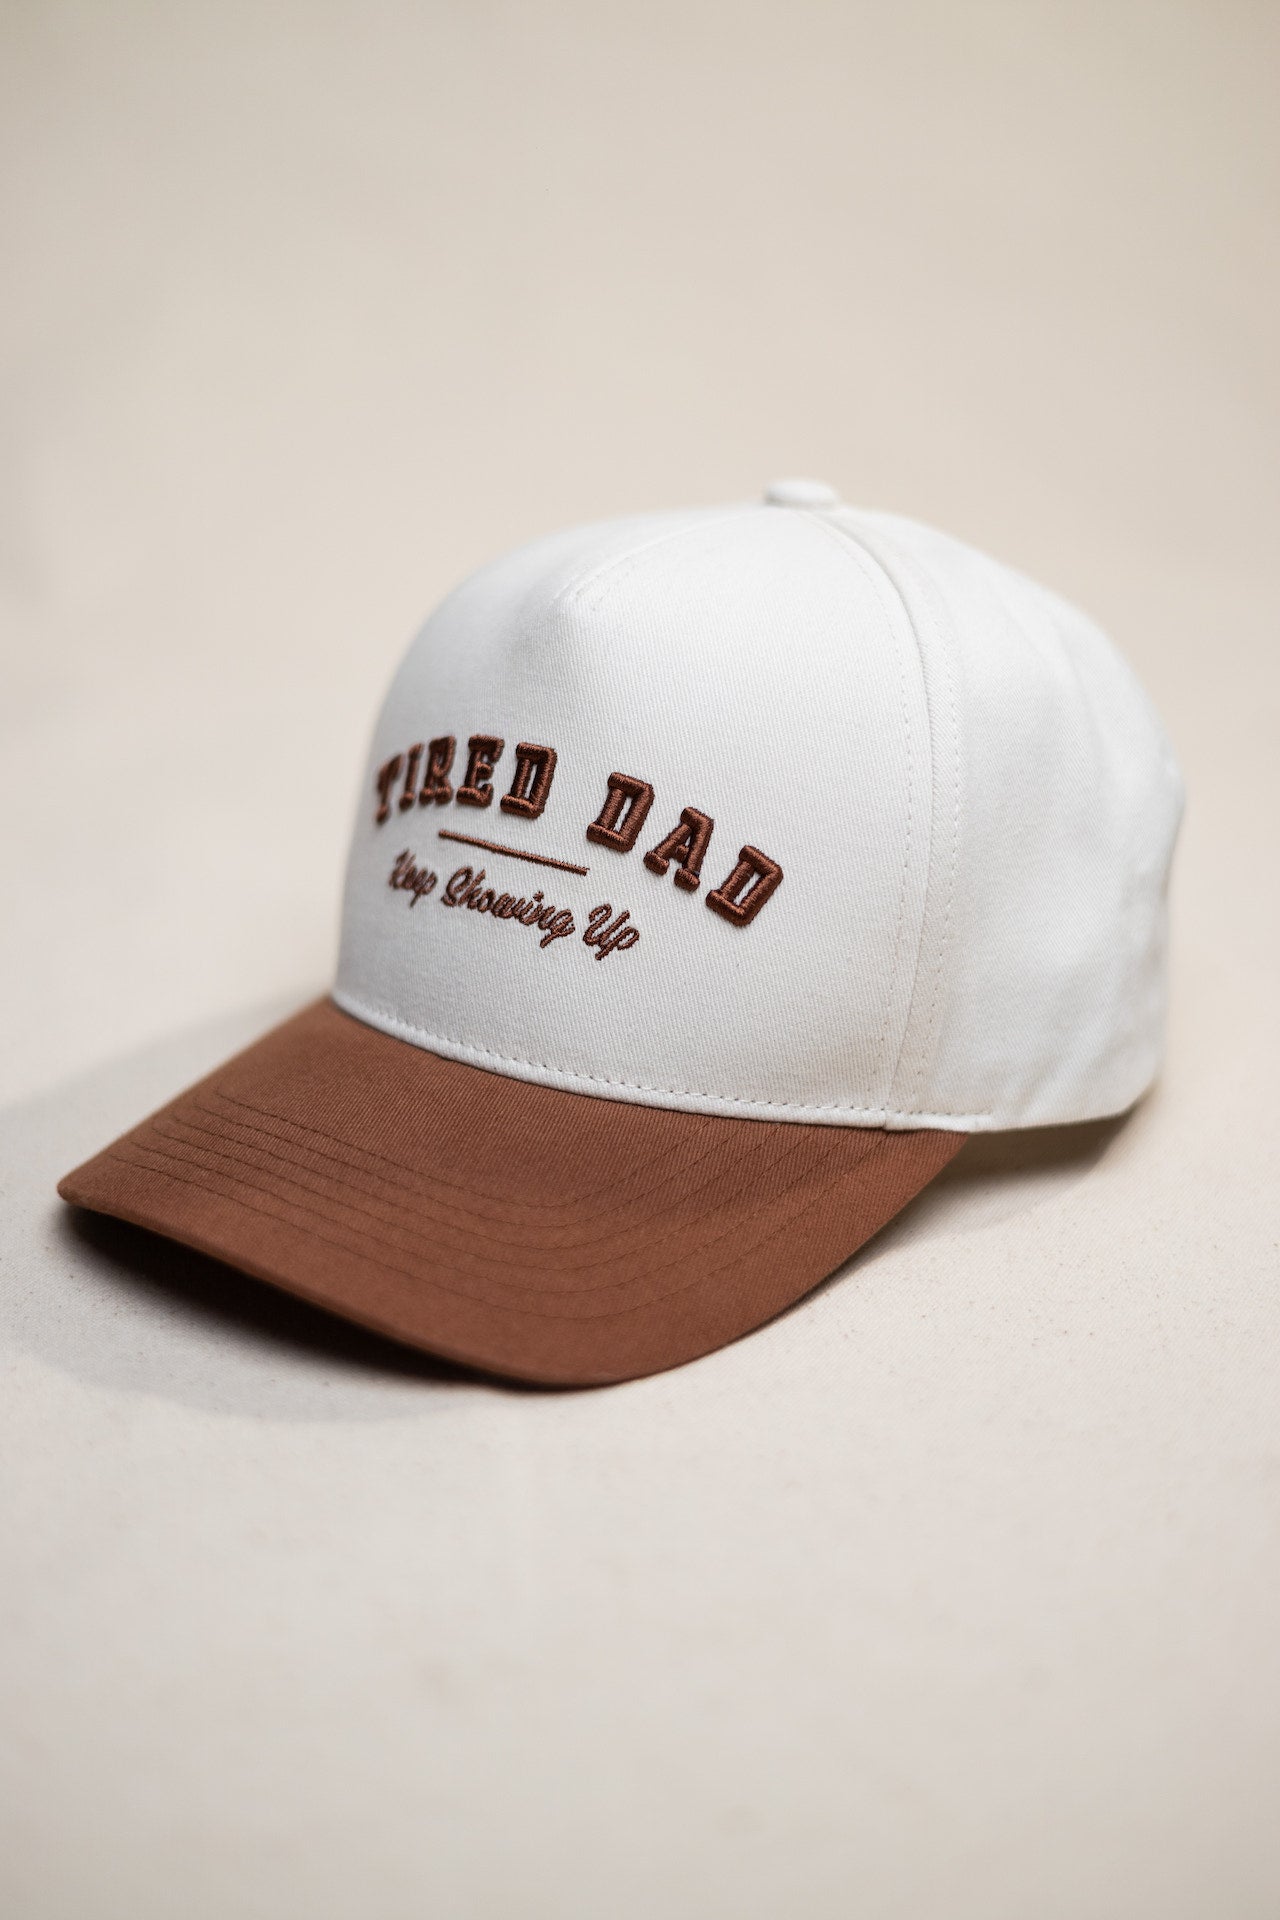 Tired Dad // Keep Showing Up // White & Brown Snapback